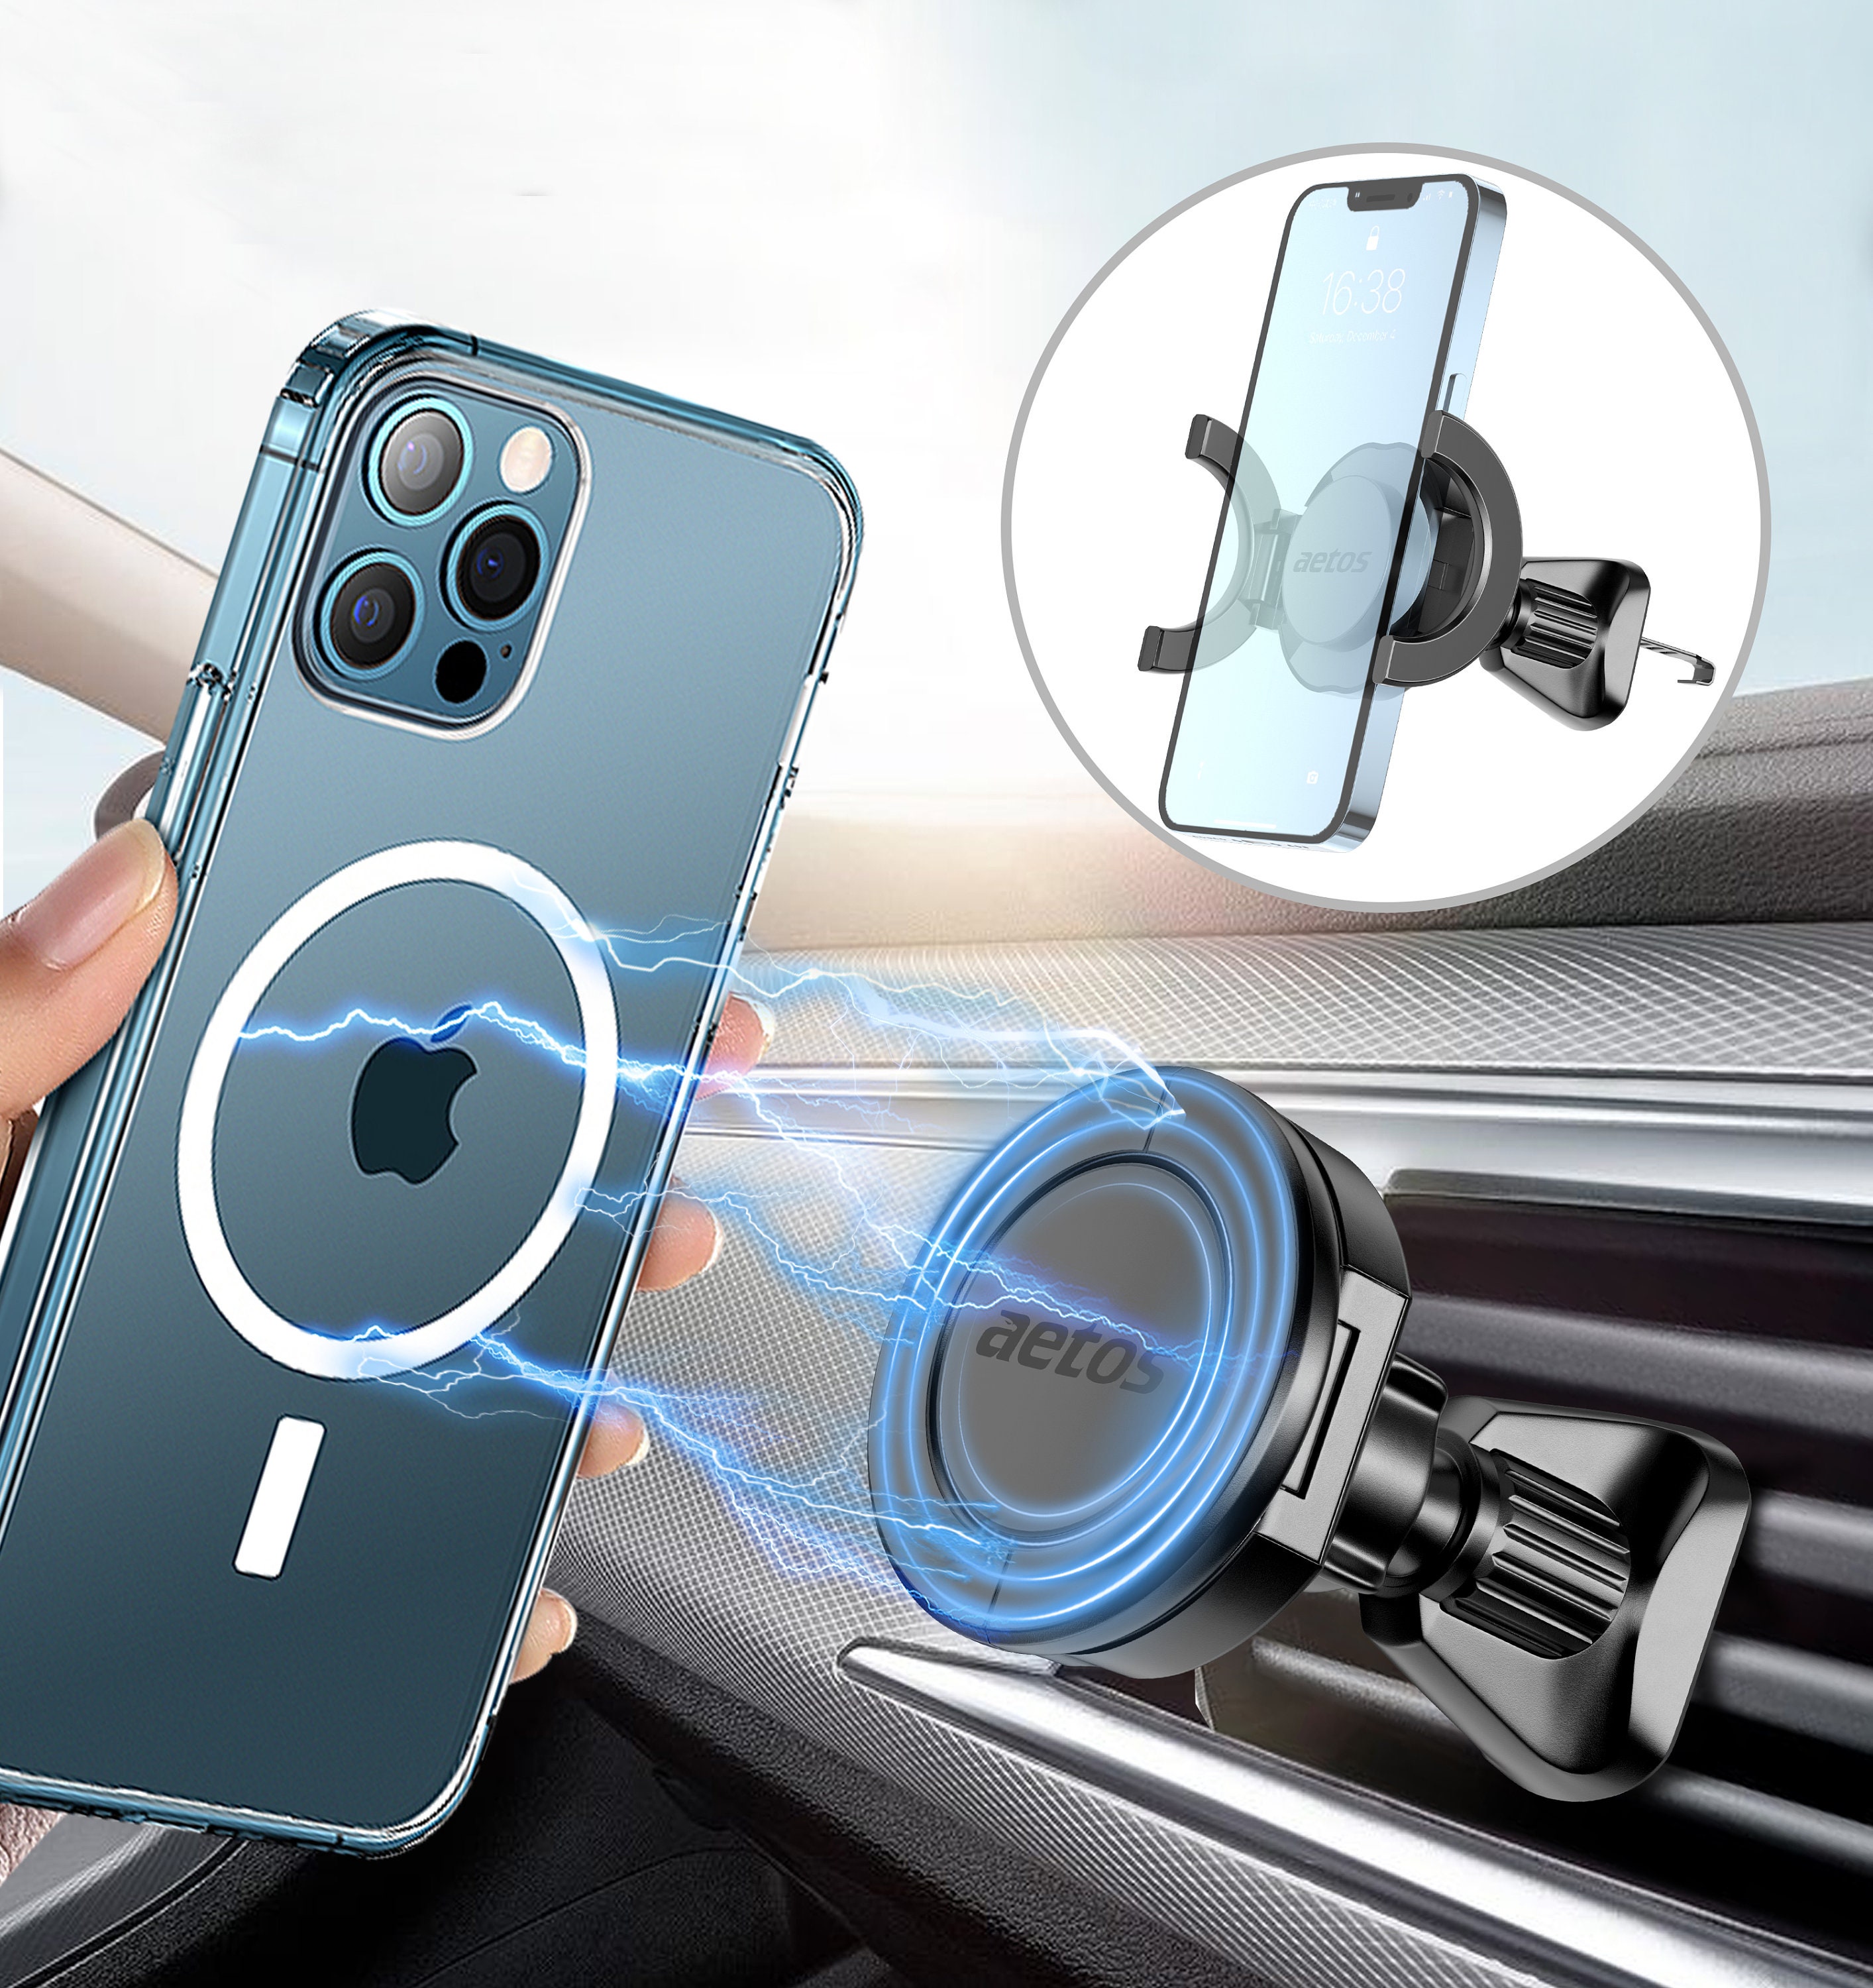 Olixar Phone Magnet Sticker, Phone Case Magnet - Put in Phone Case and Use  with Car Phone Holder - Thin Magnets Stickers Mount Magnetic Plate - Black